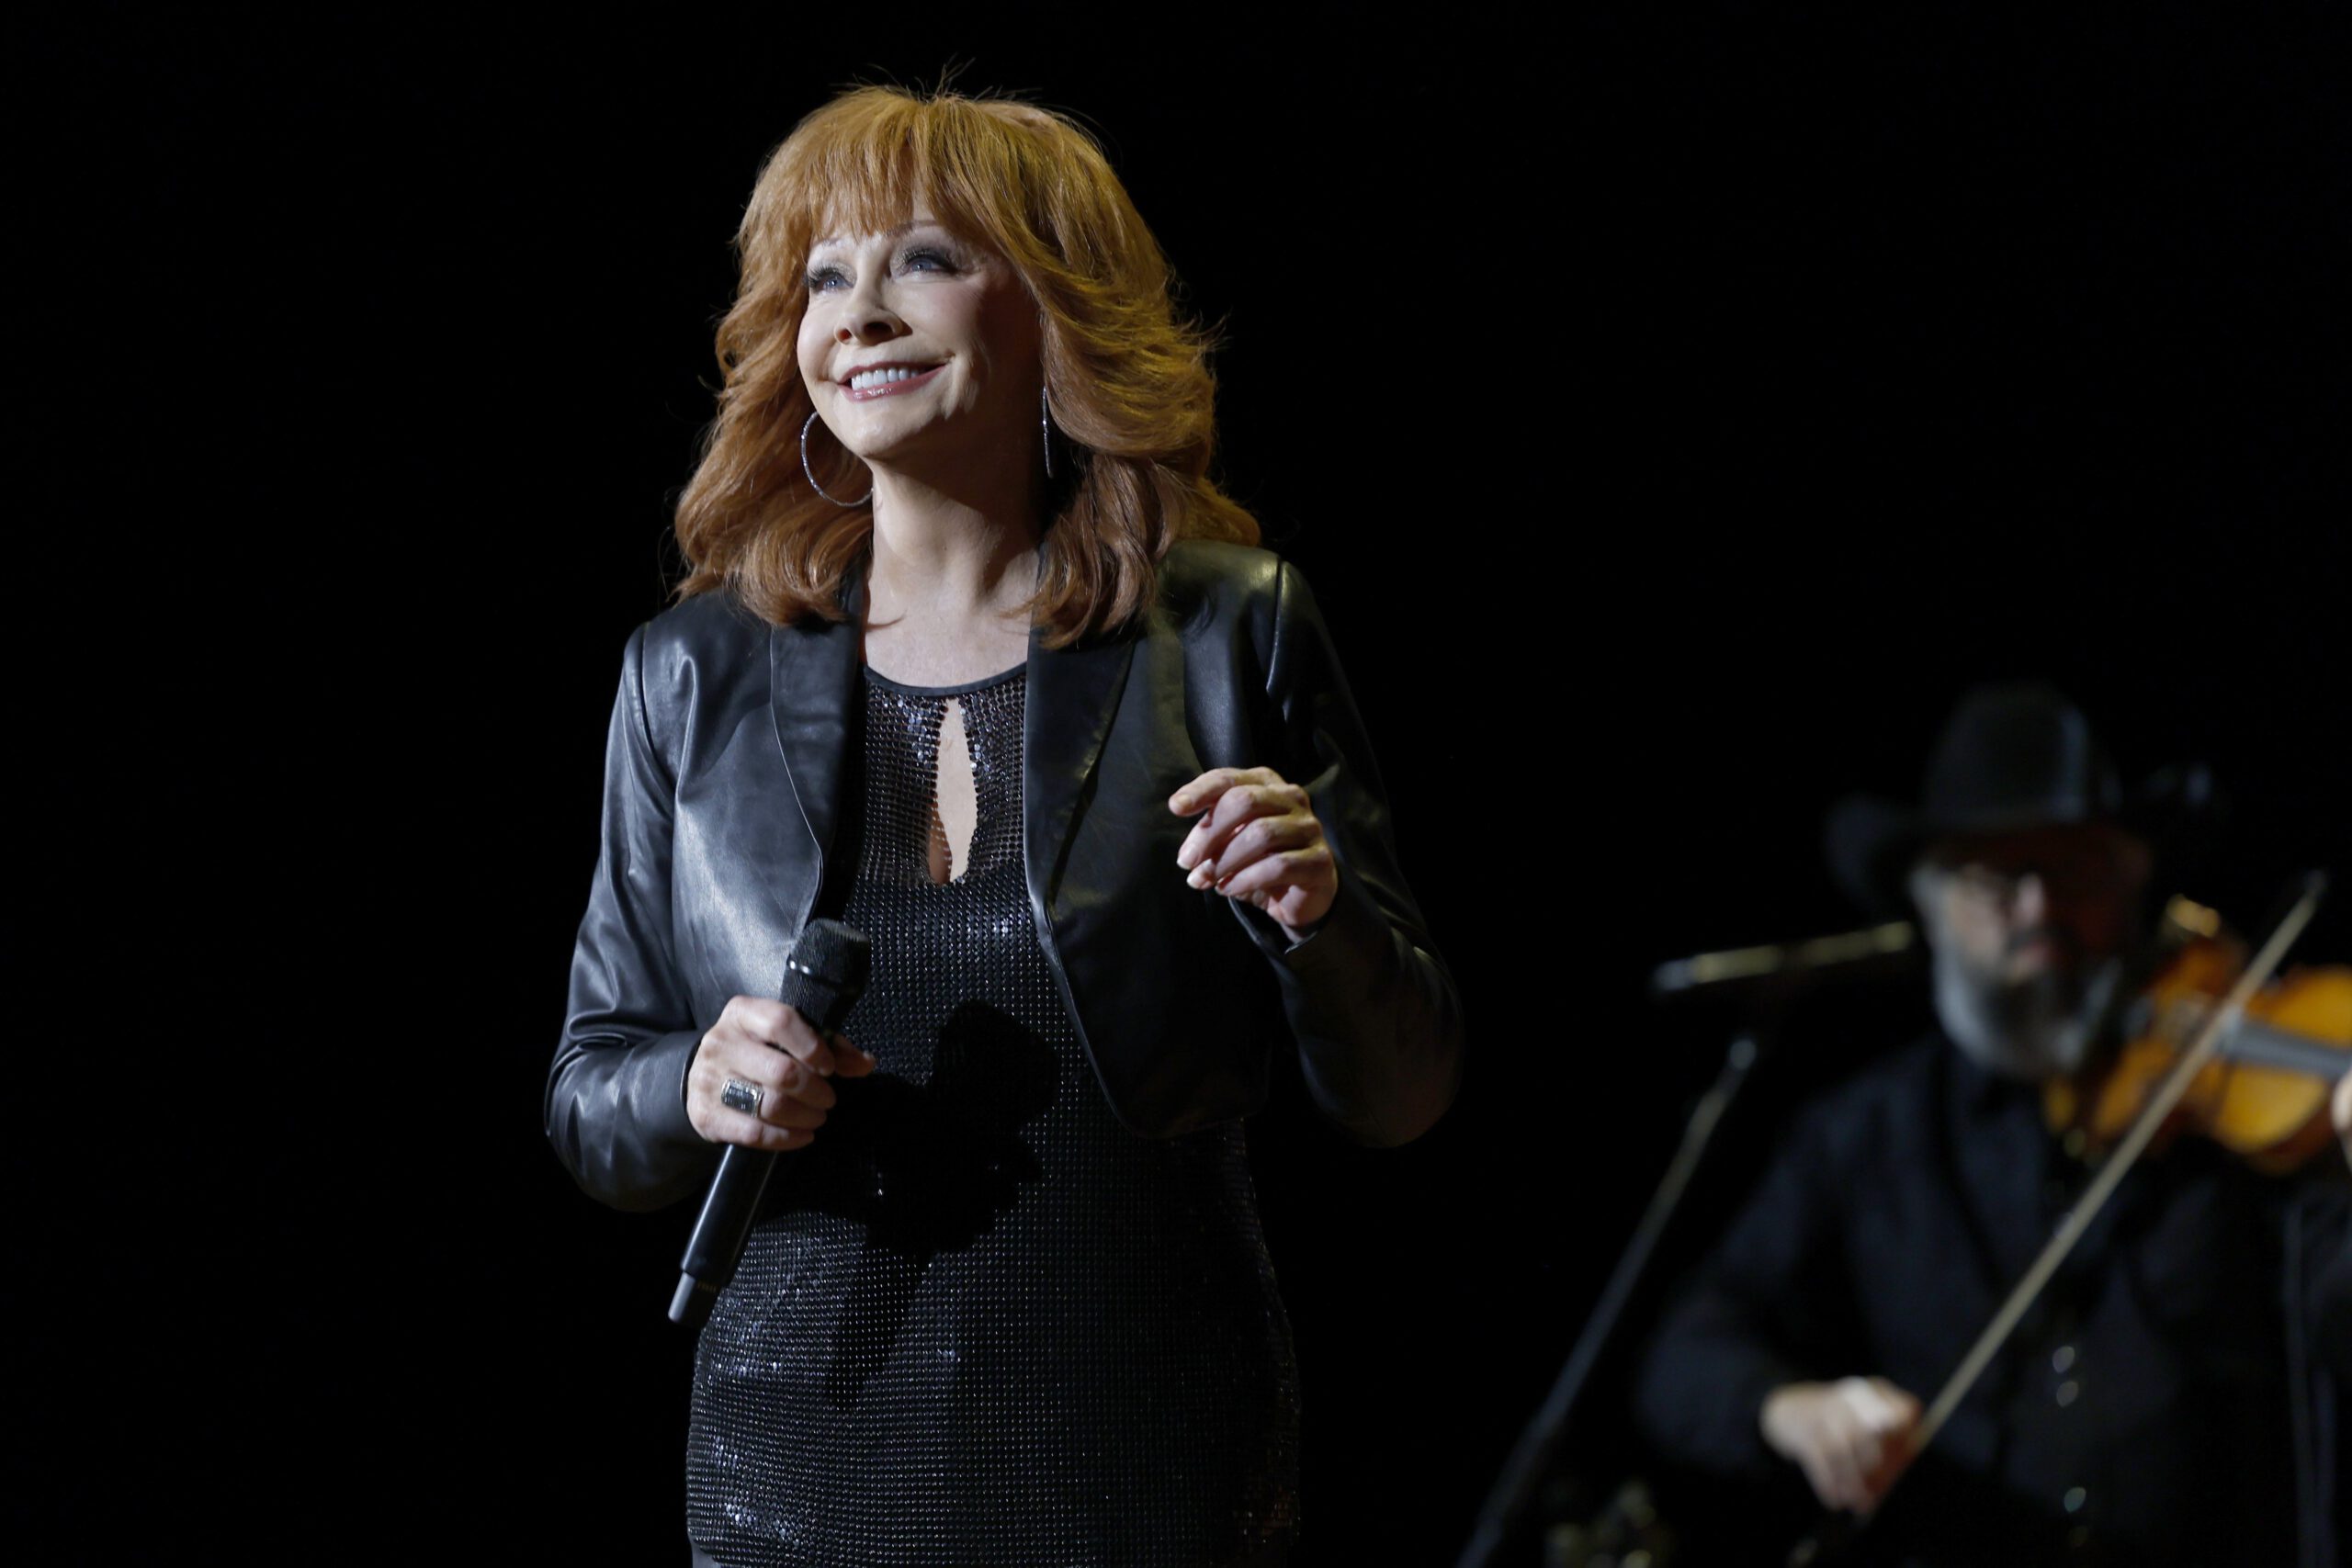 Reba McEntire in an all black get up.